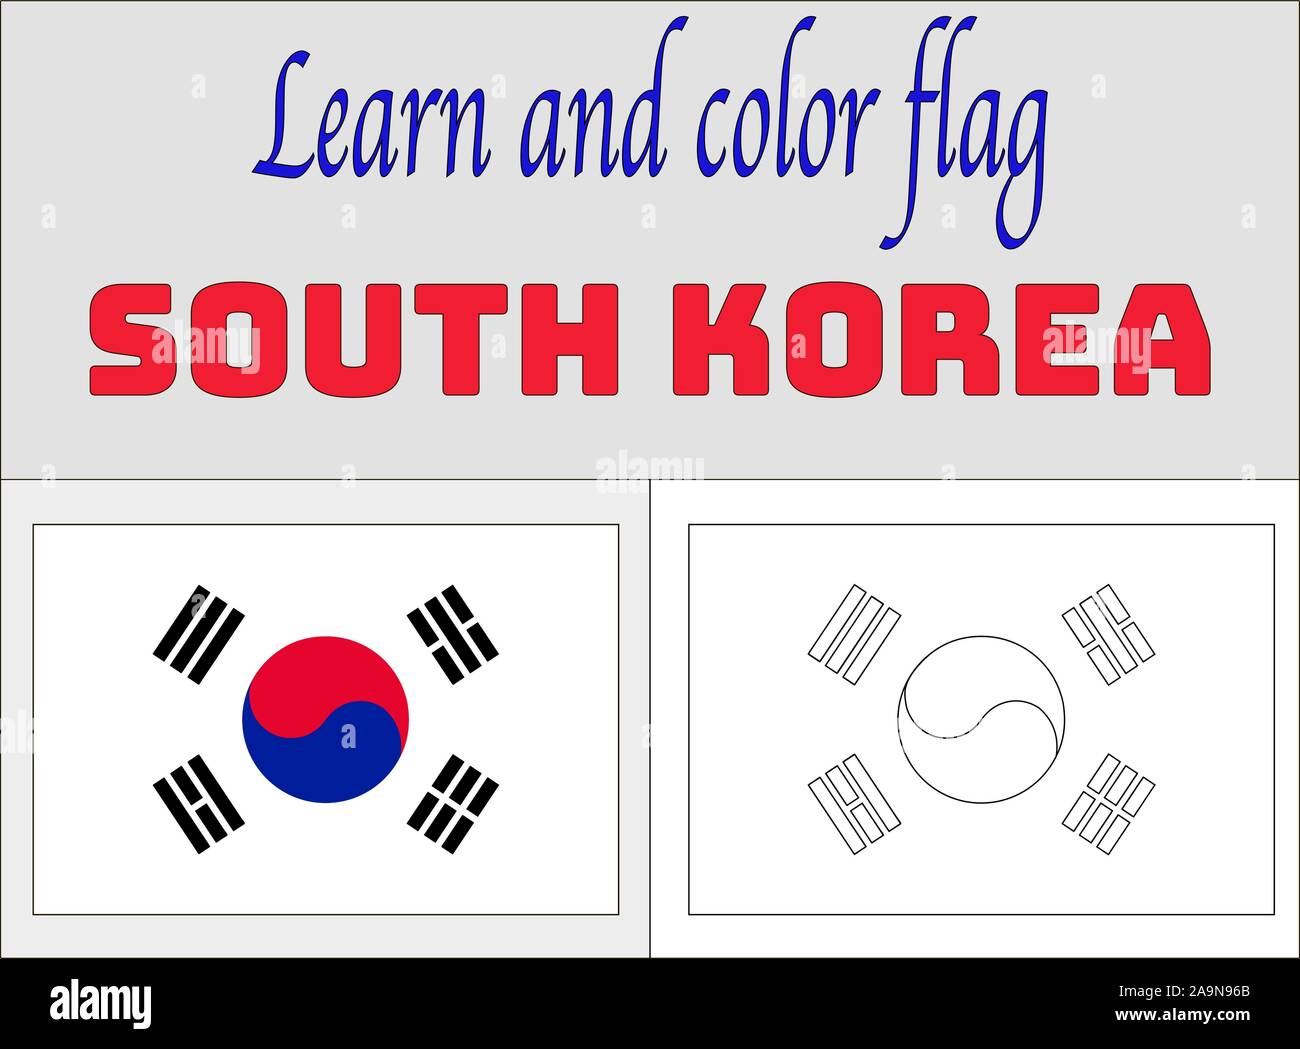 South korea national flag coloring book pages for education and learning original colors proportion vector illustration countries set stock vector image art